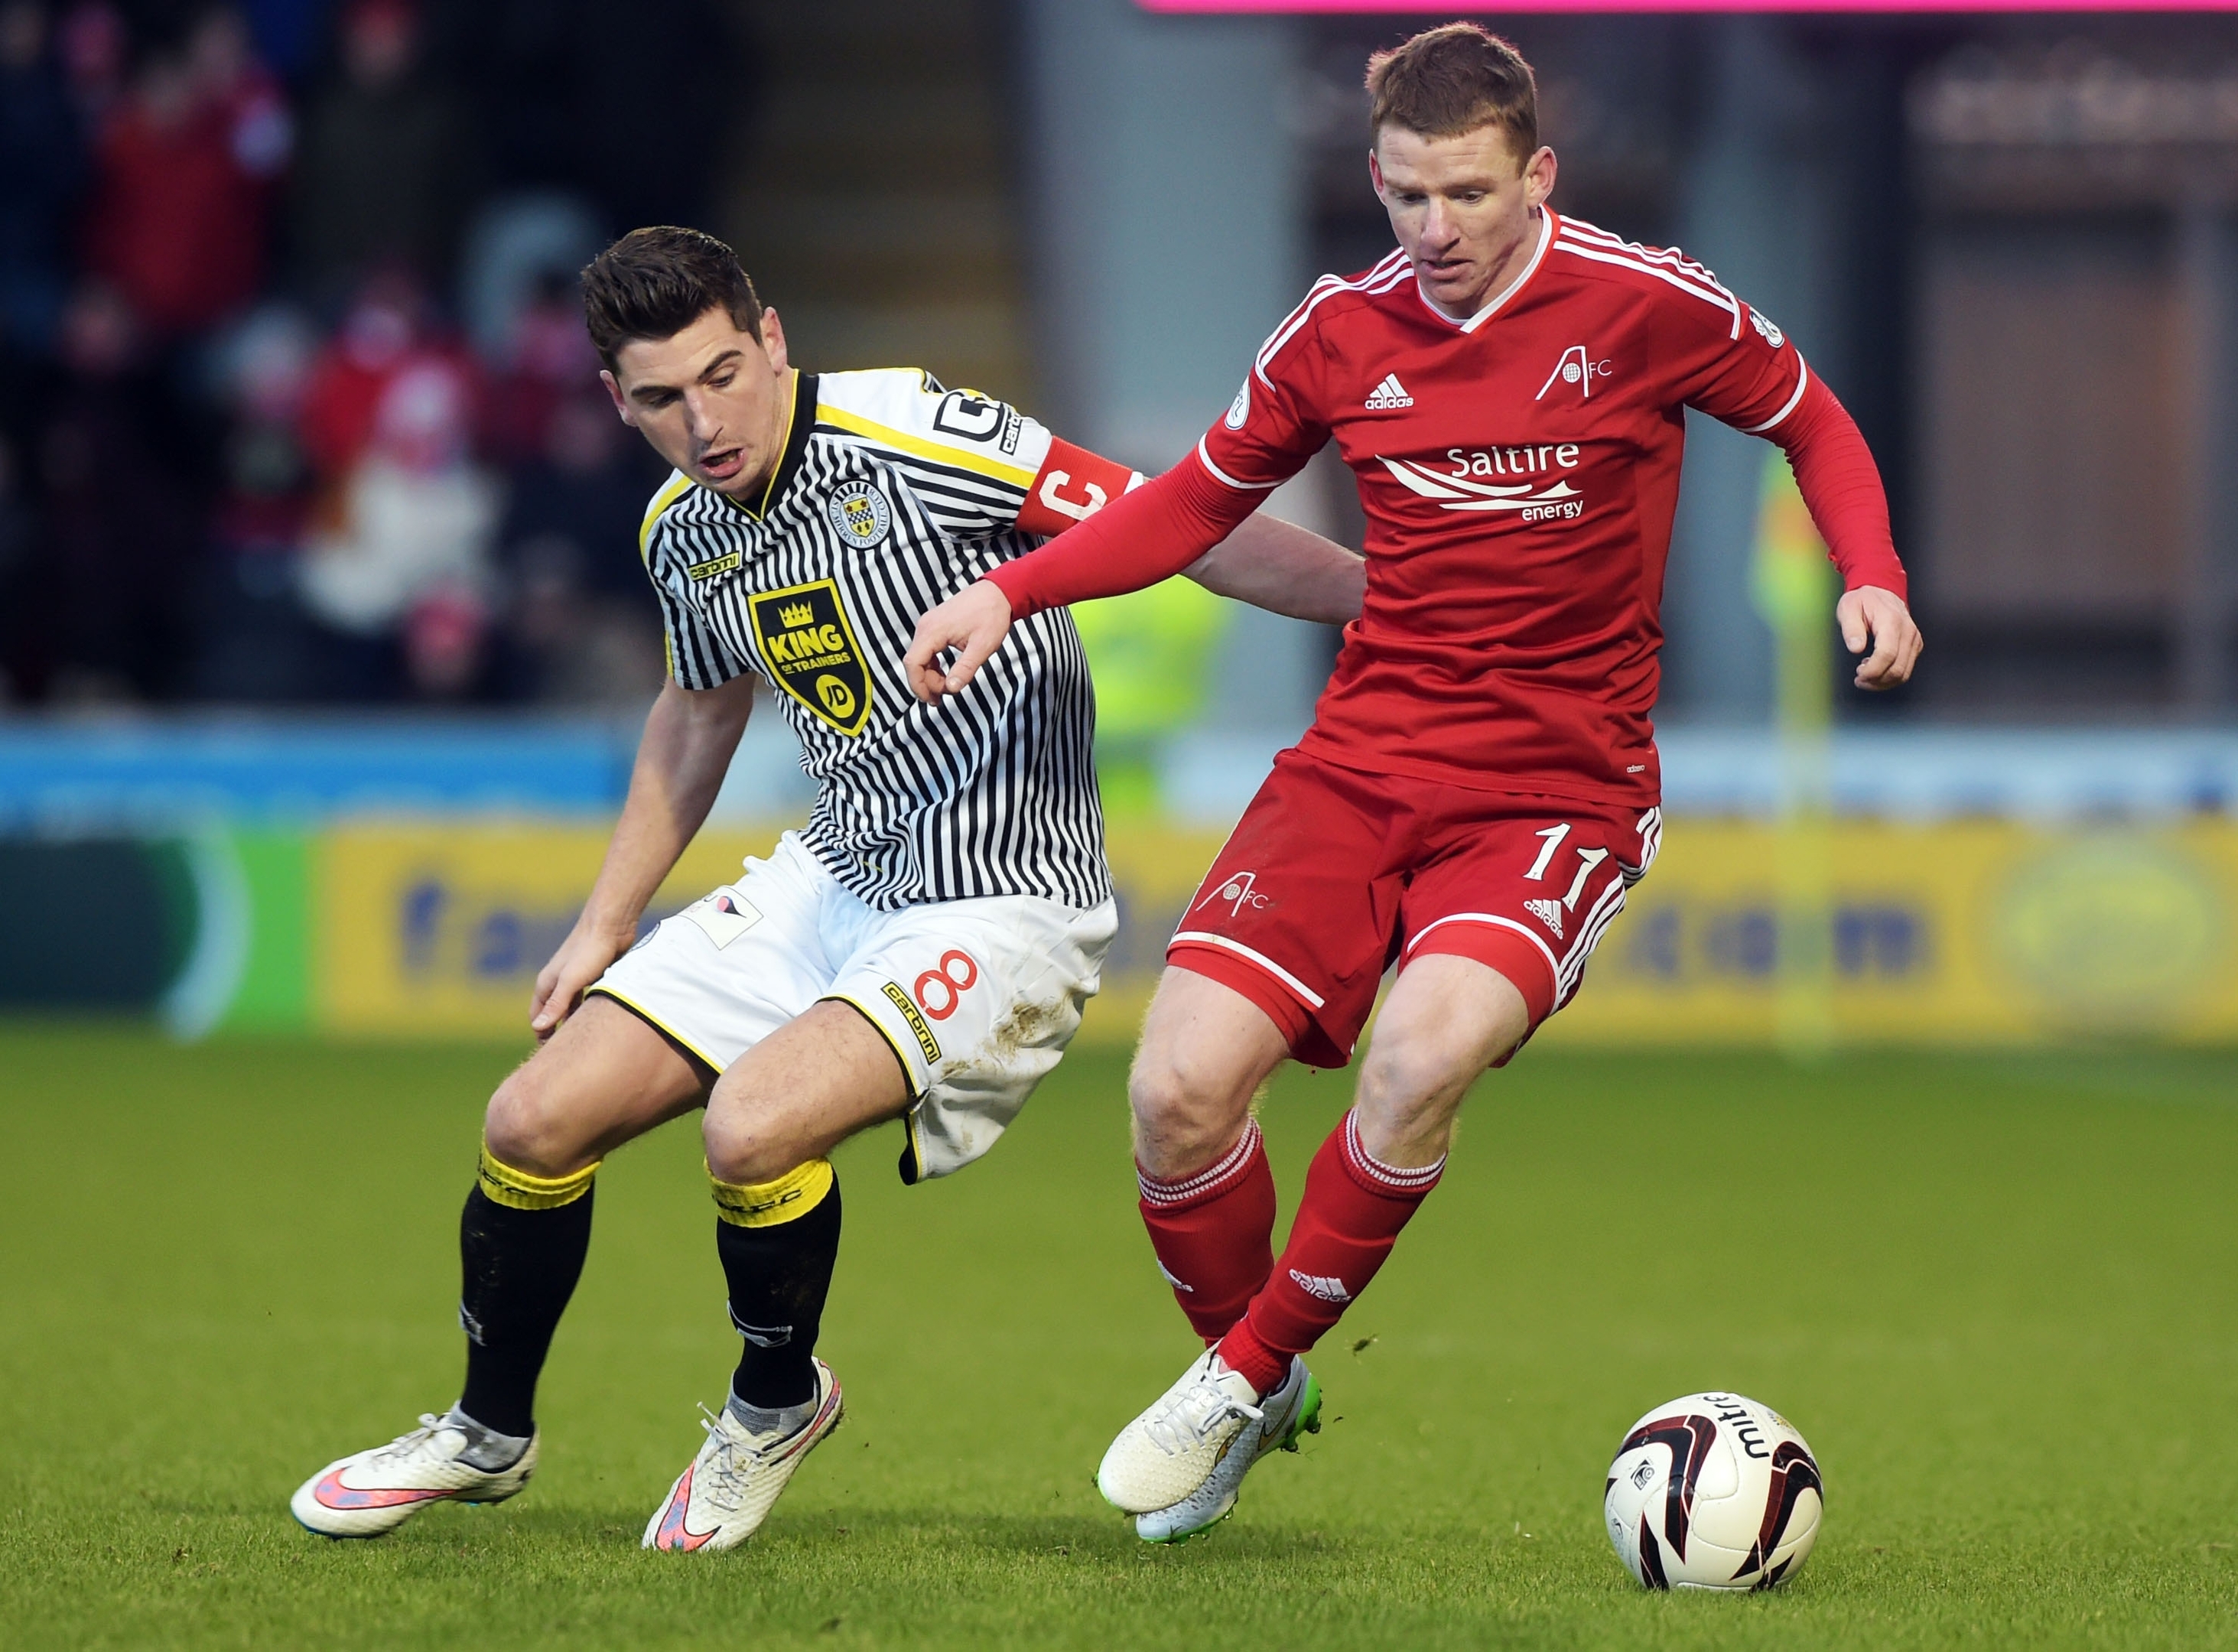 McLean (left) will be swapping the black and white stripes for the red of Aberdeen tomorrow, while Hayes (right) misses the game through injury